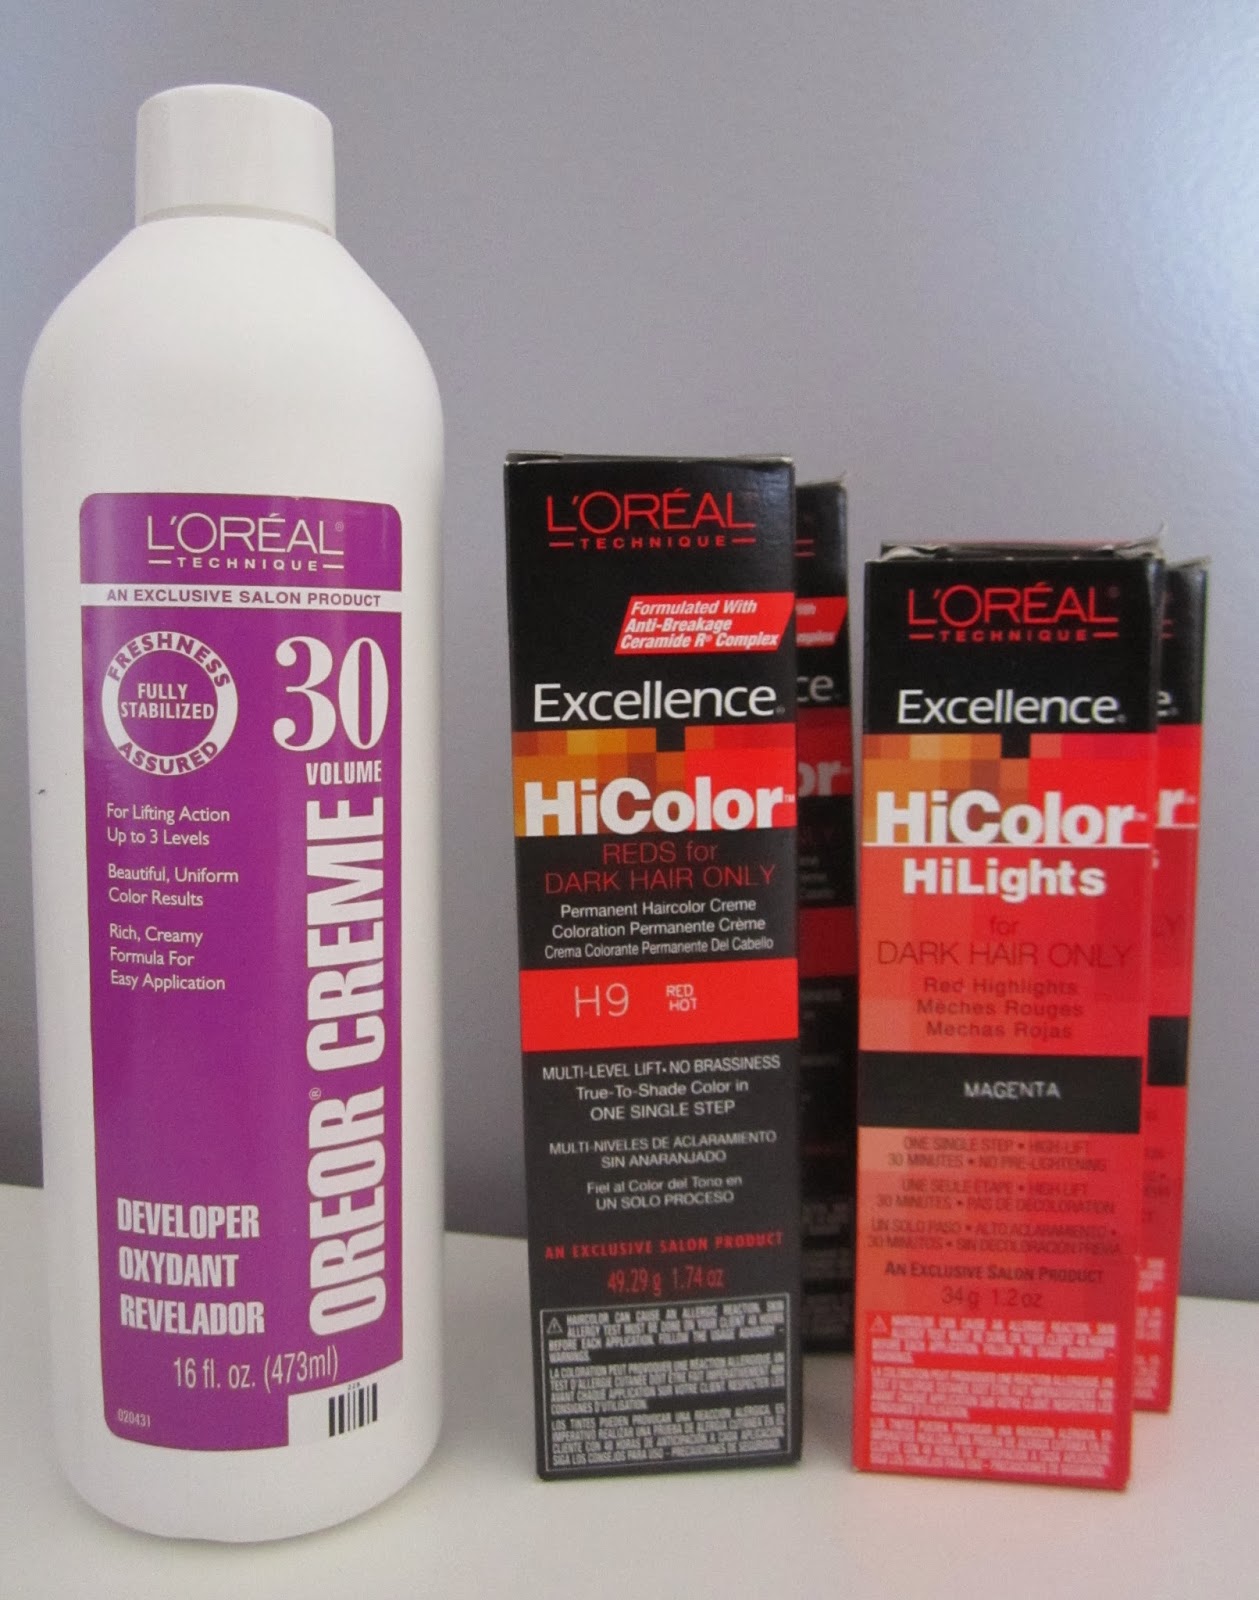 L'Oreal Excellent HiColor - Red Hot.